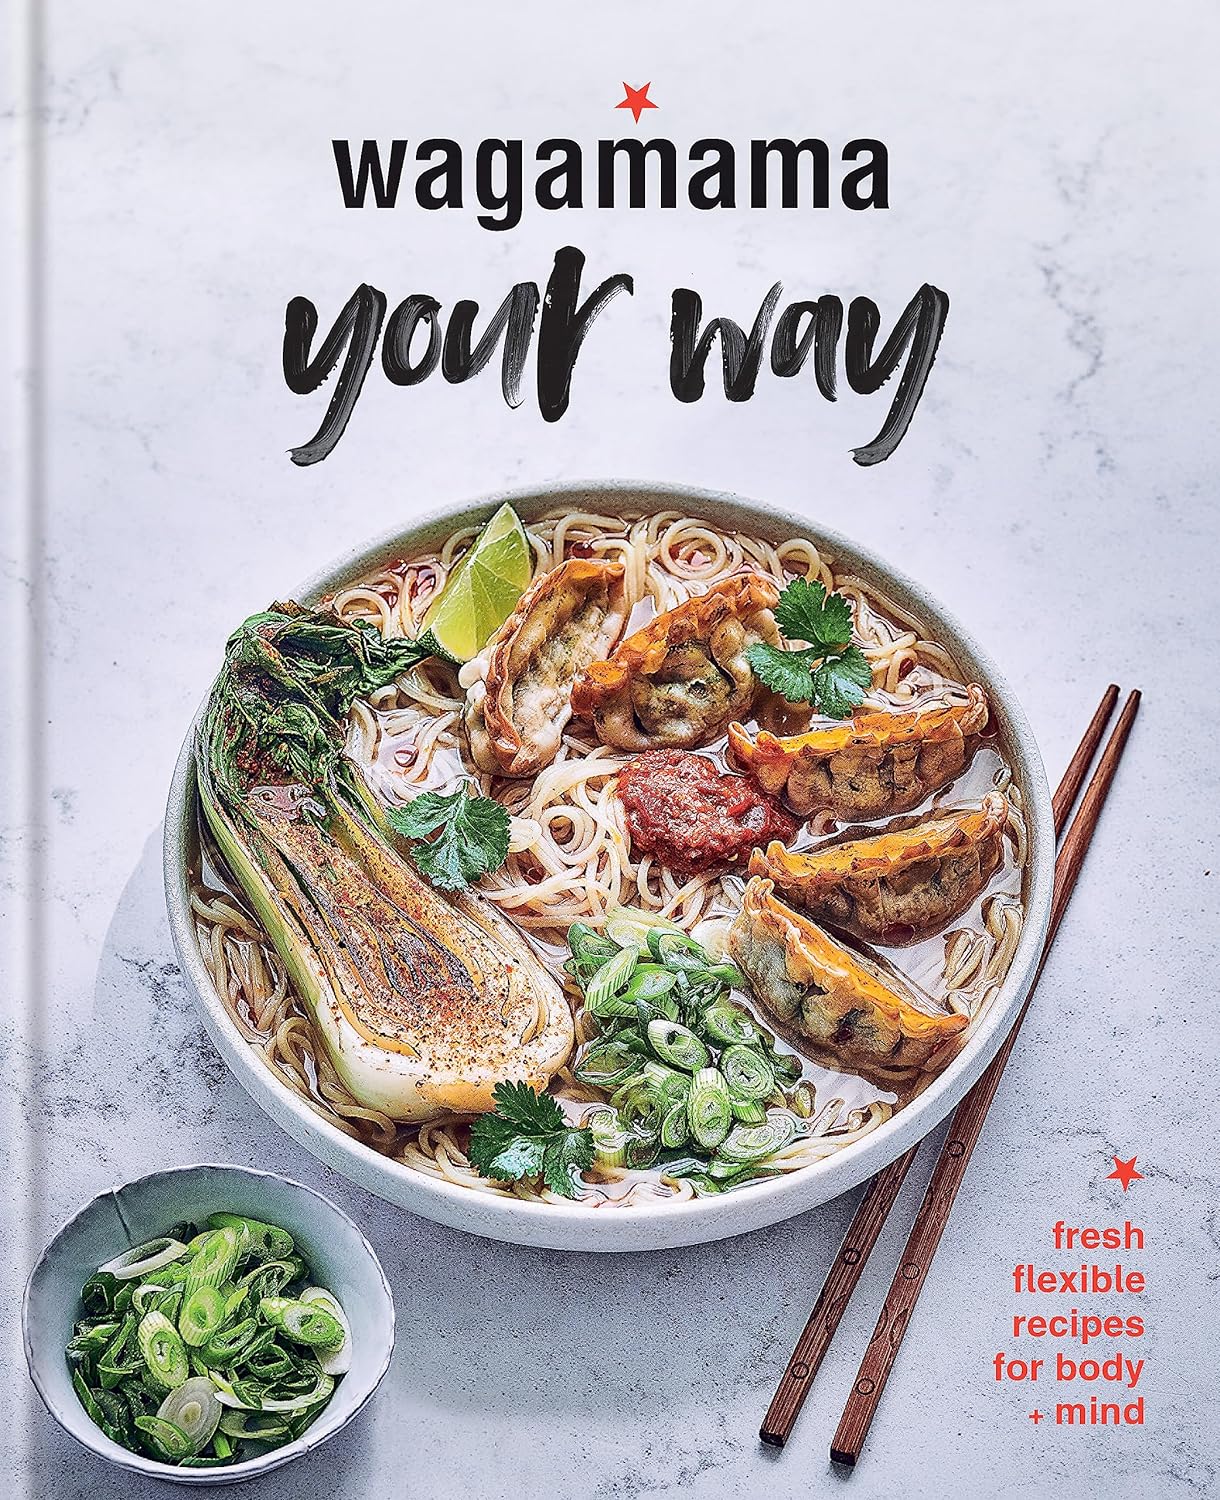 Wagamama Your Way: Fresh Flexible Recipes for Body + Mind (Wagamama Titles)     Hardcover – 2 Sept. 2021